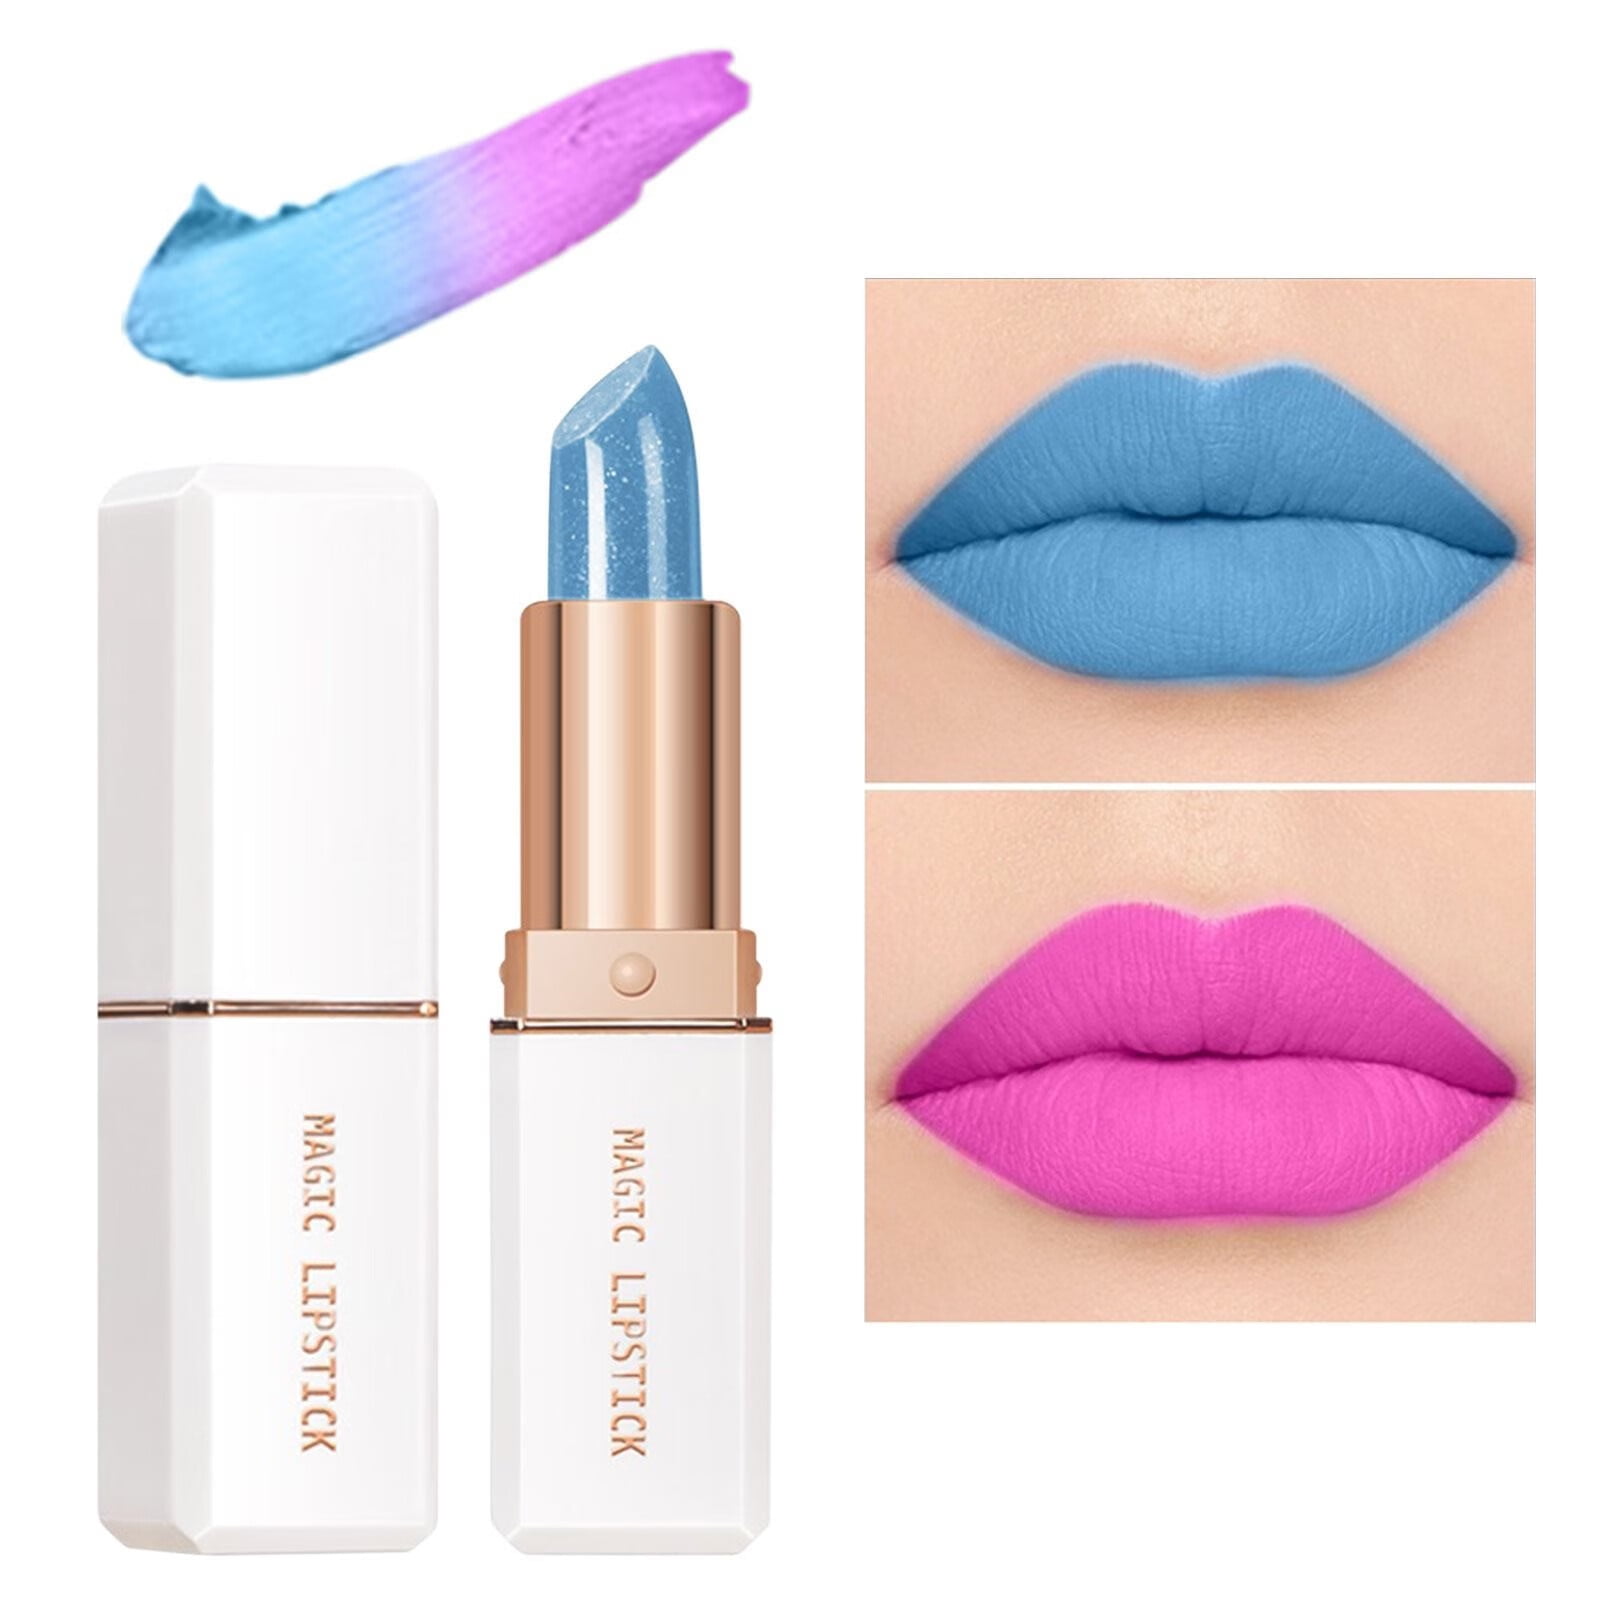  Yaper 3 Color Magic Temperature Changing Colors Lipstick,Long  Lasting and Not Easy to Stick Cup Magic Color Changing Waterproof Lipstick Lip  Gloss for Women (Blue & Black & Red) 